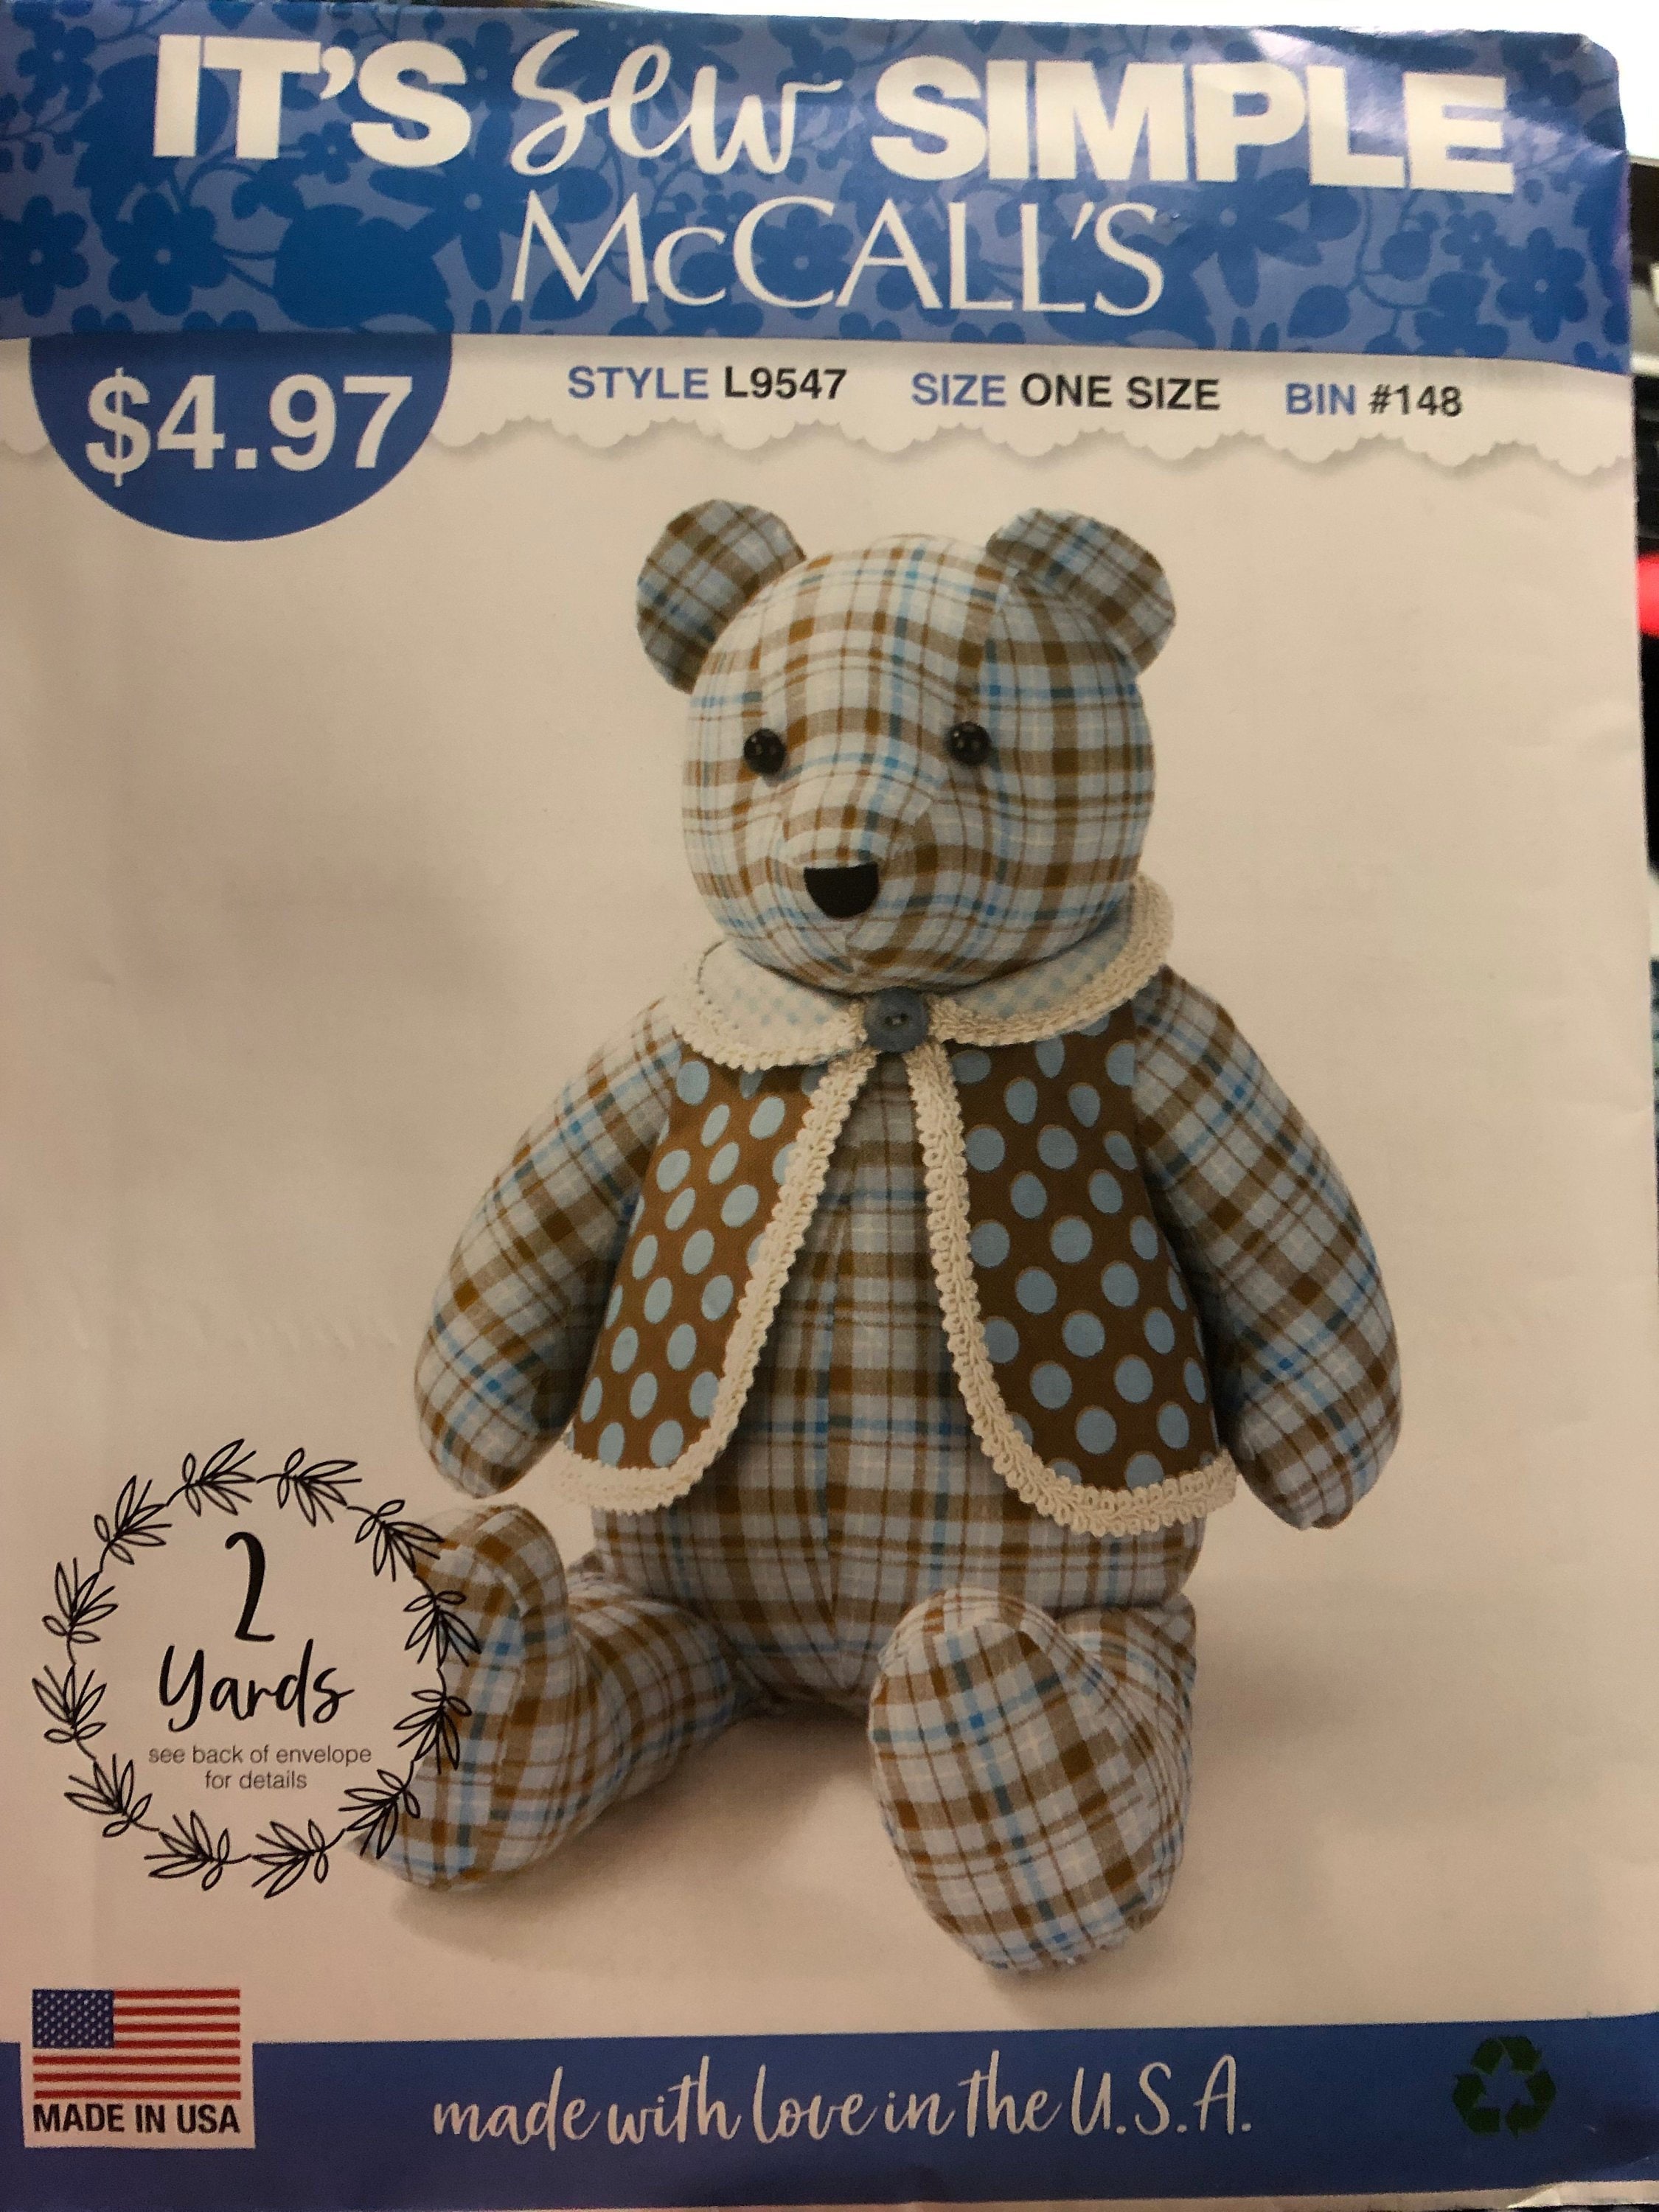 Inspiration: Make a memory bear to honor a loved one – Sewing